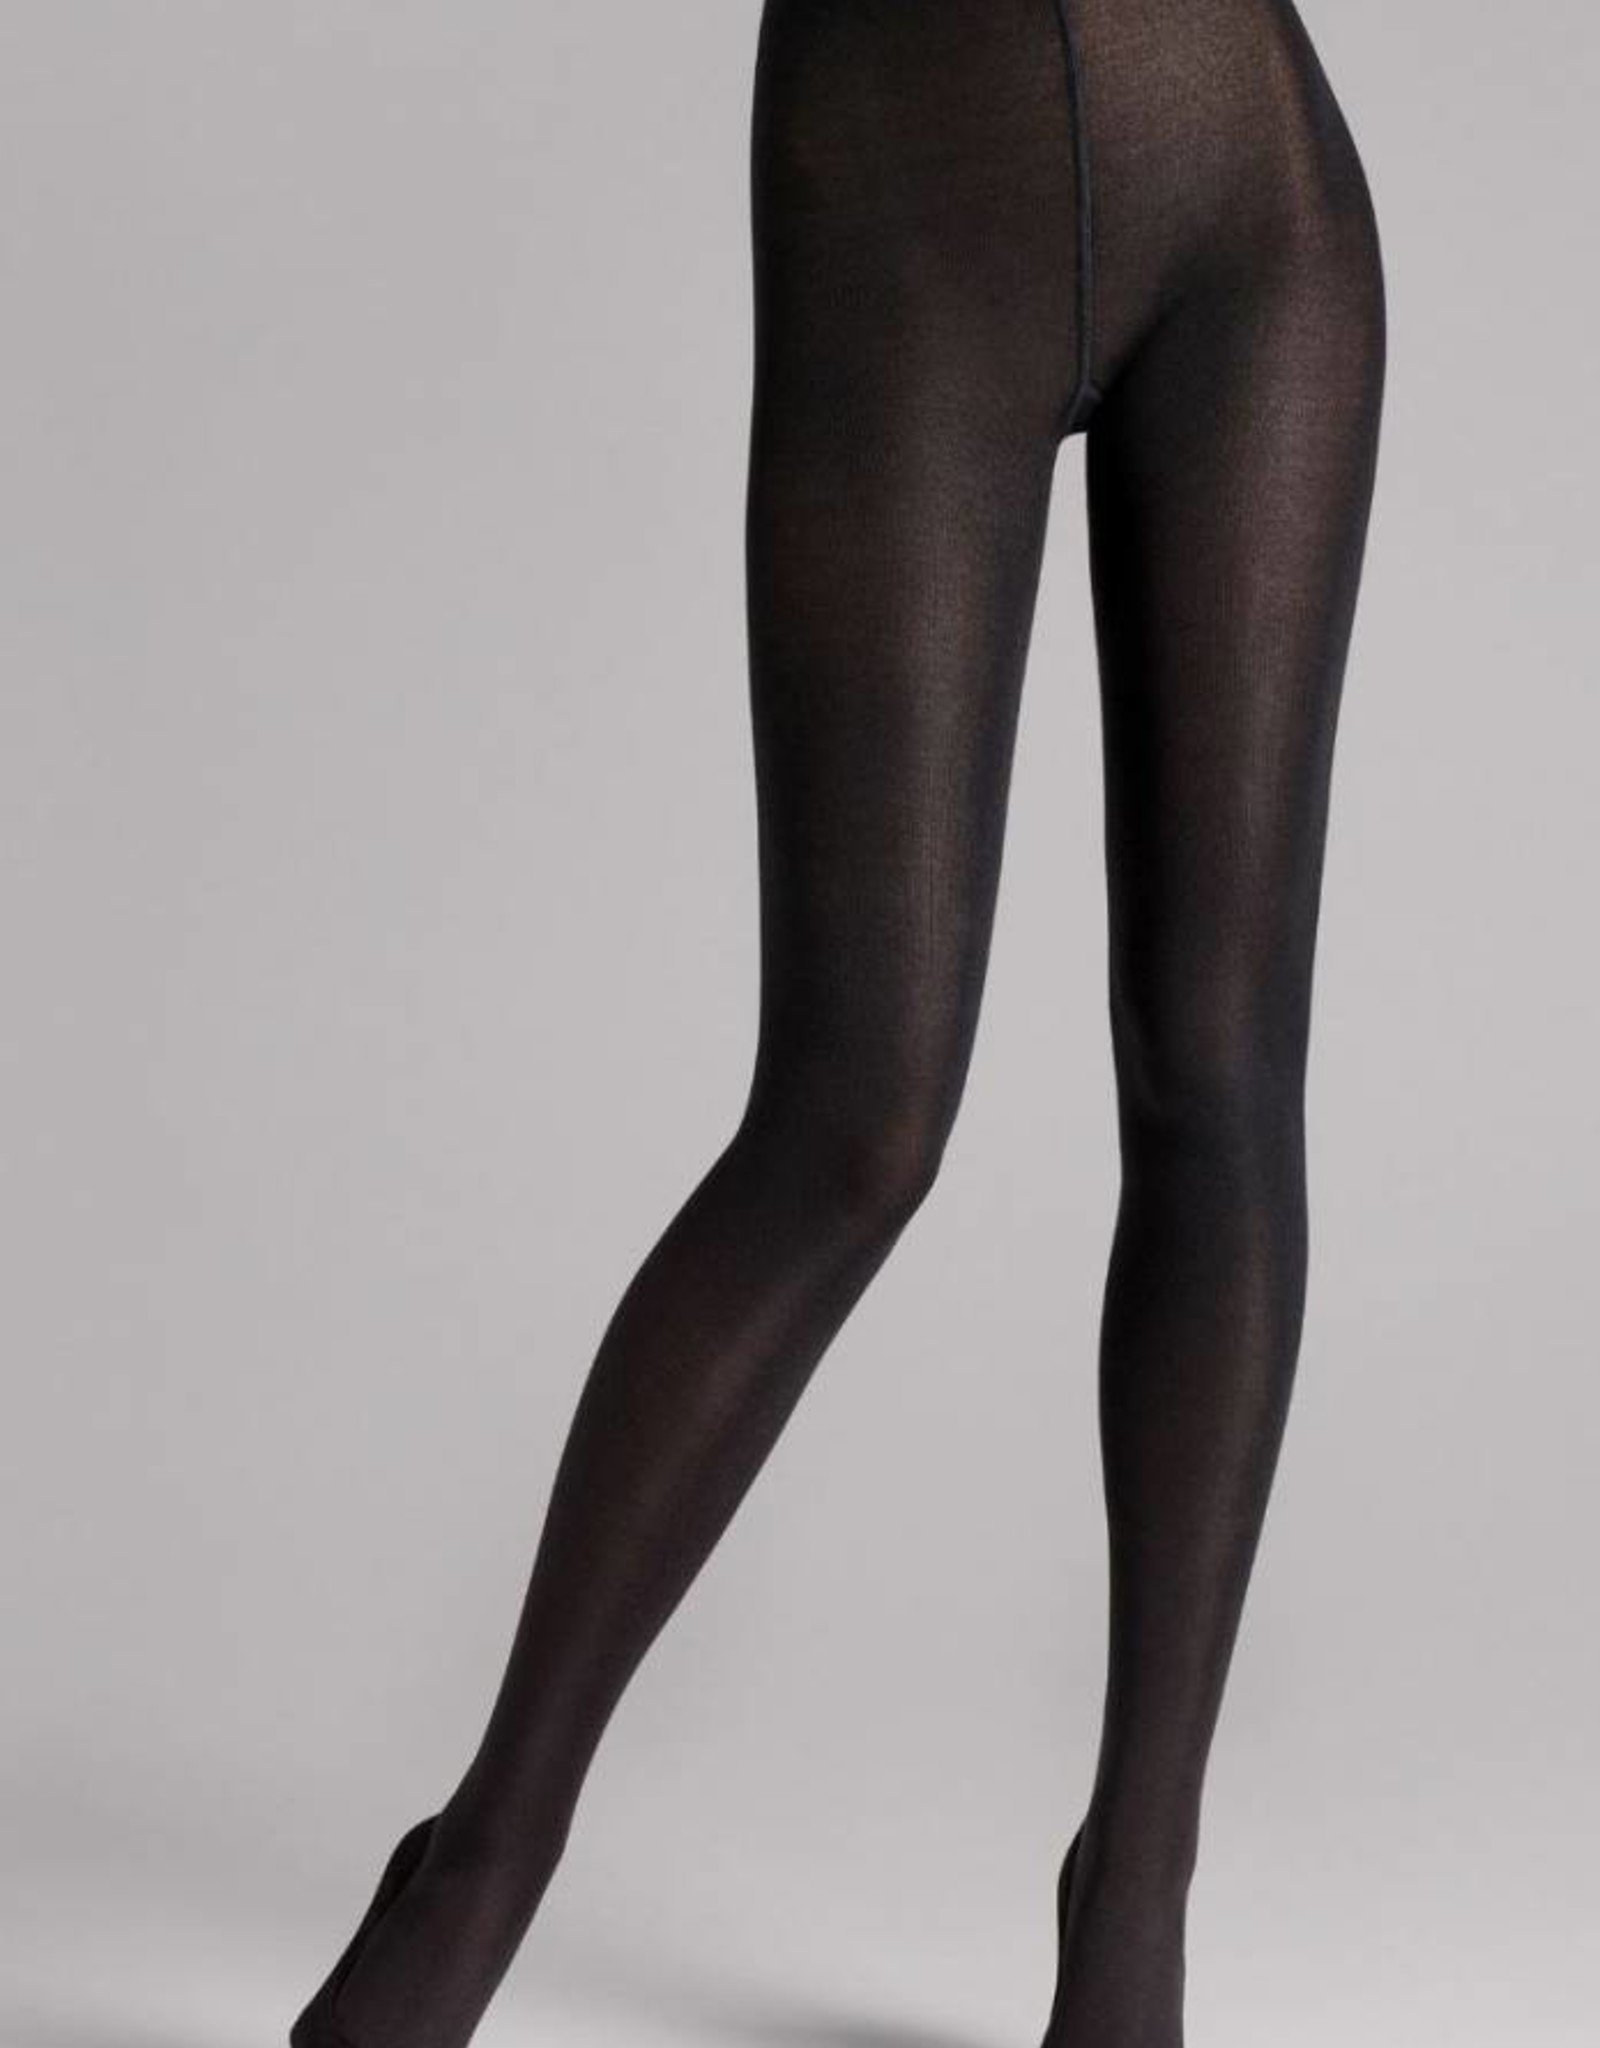 Wolford Cashmere/Silk Tights